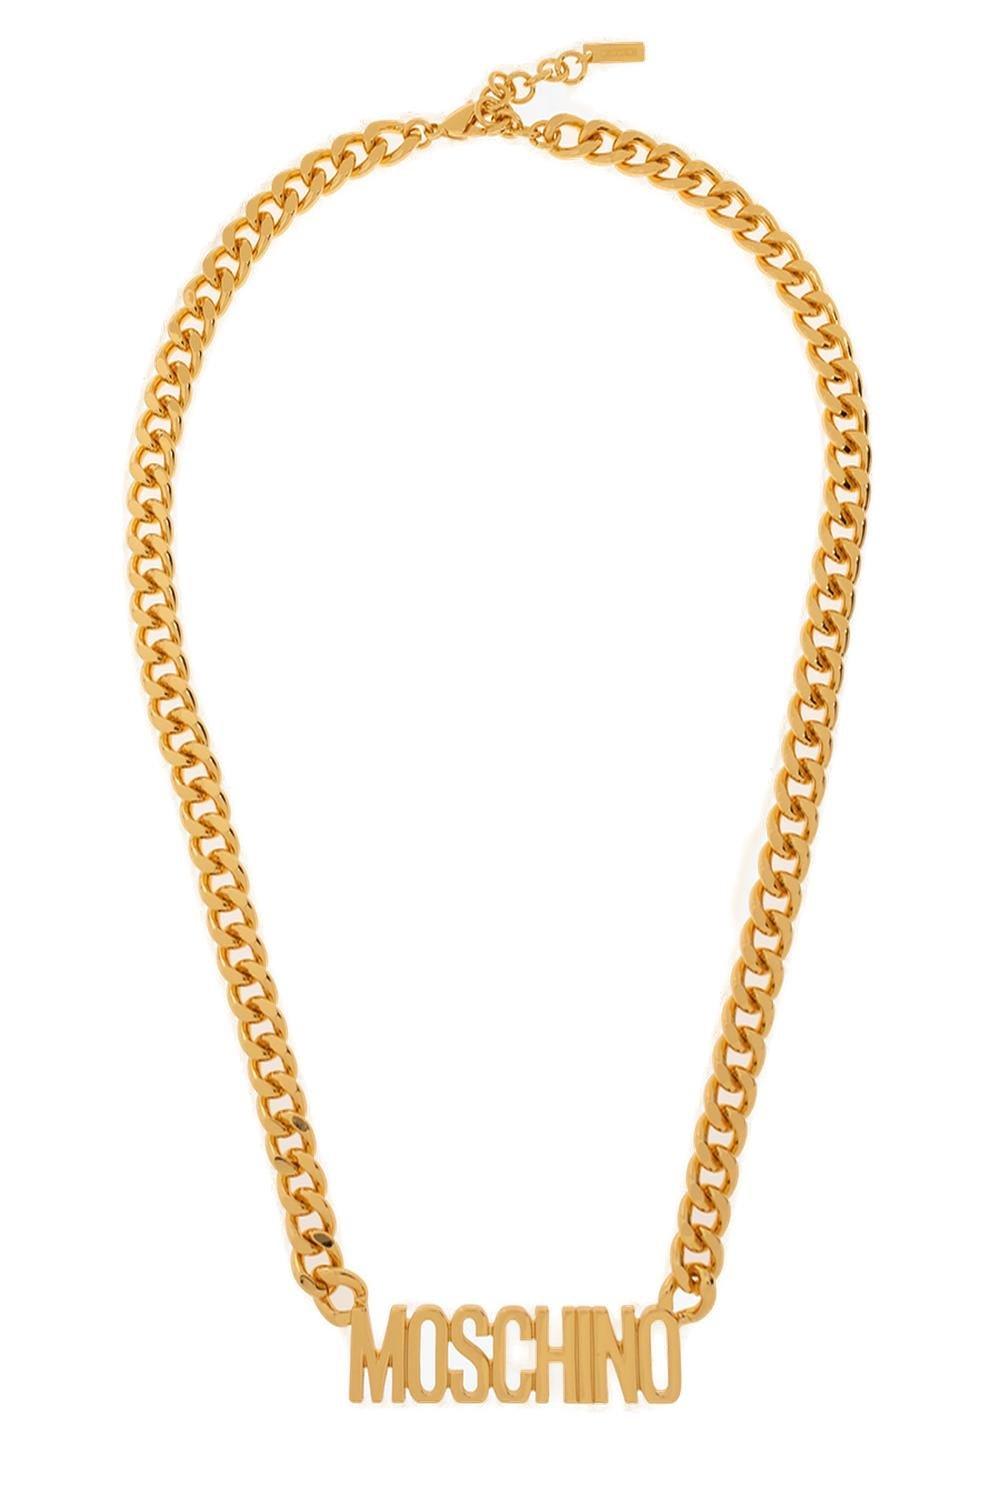 MOSCHINO LOGO-LETTERING CURB CHAIN NECKLACE